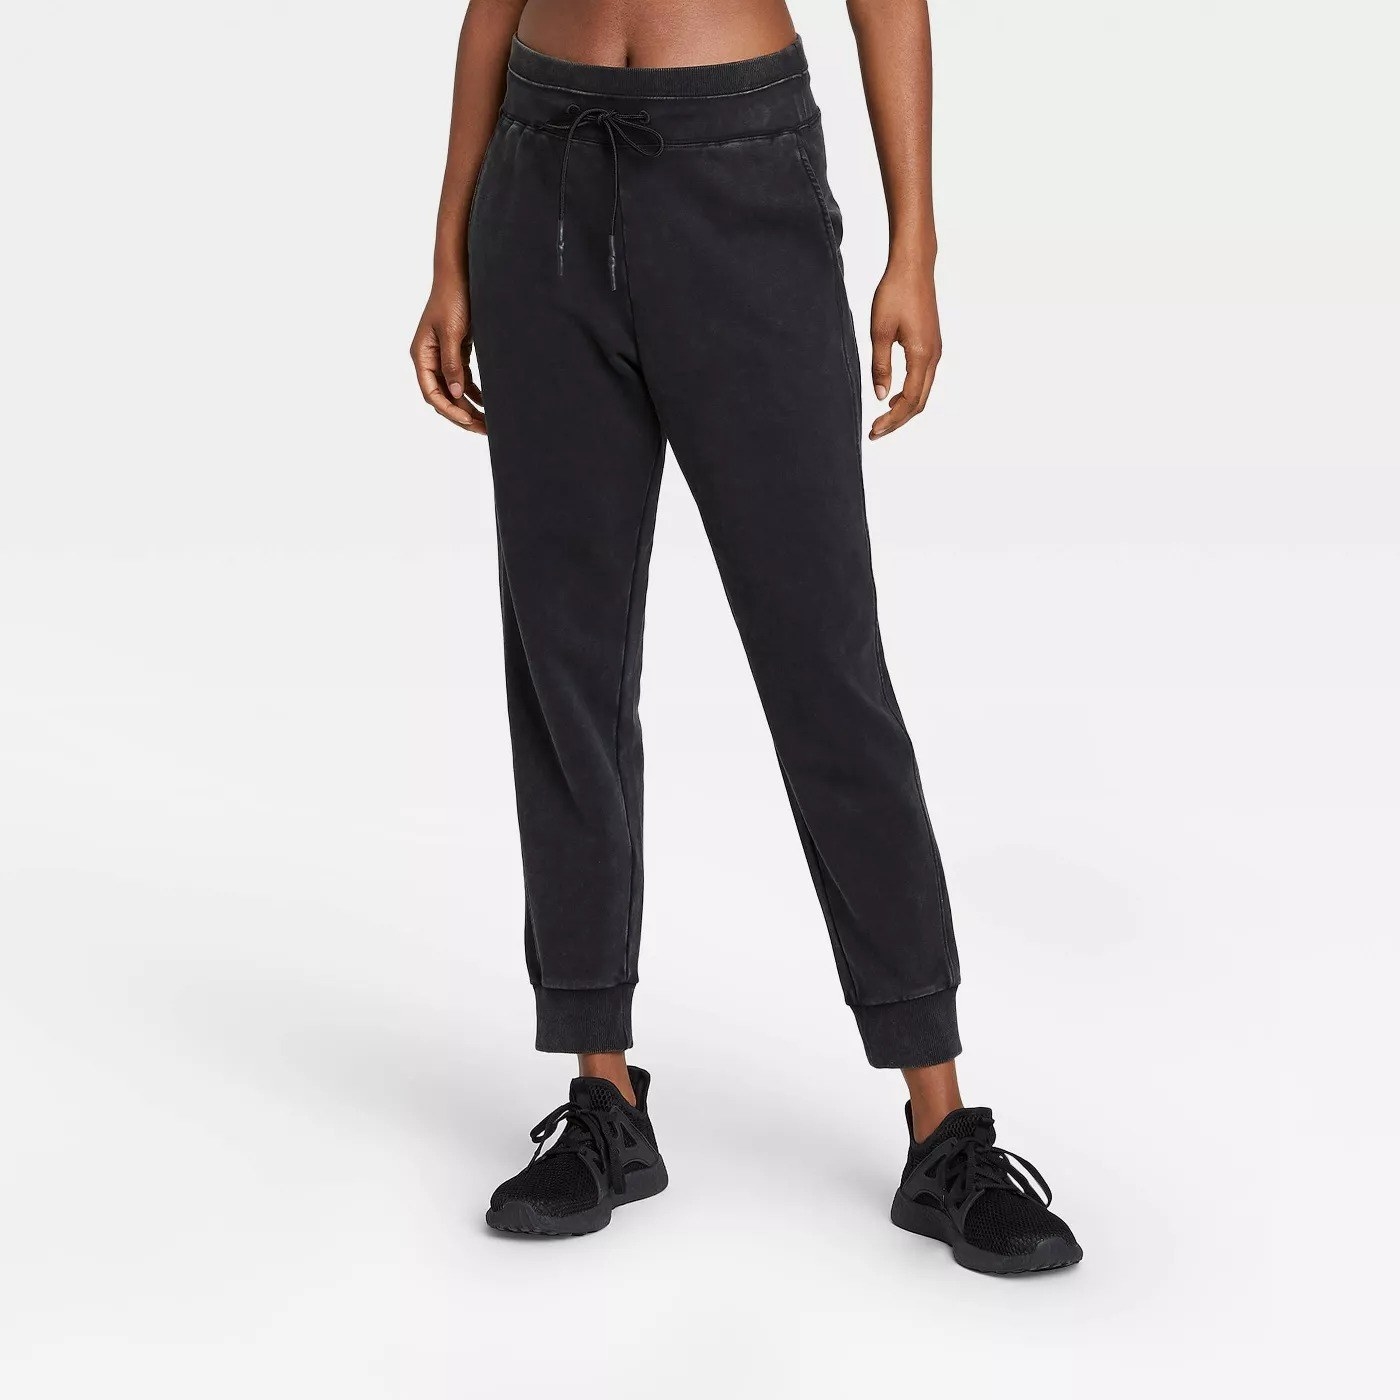 Model wearing black sweats cuffed at the bottom of the pants, stops at the ankle